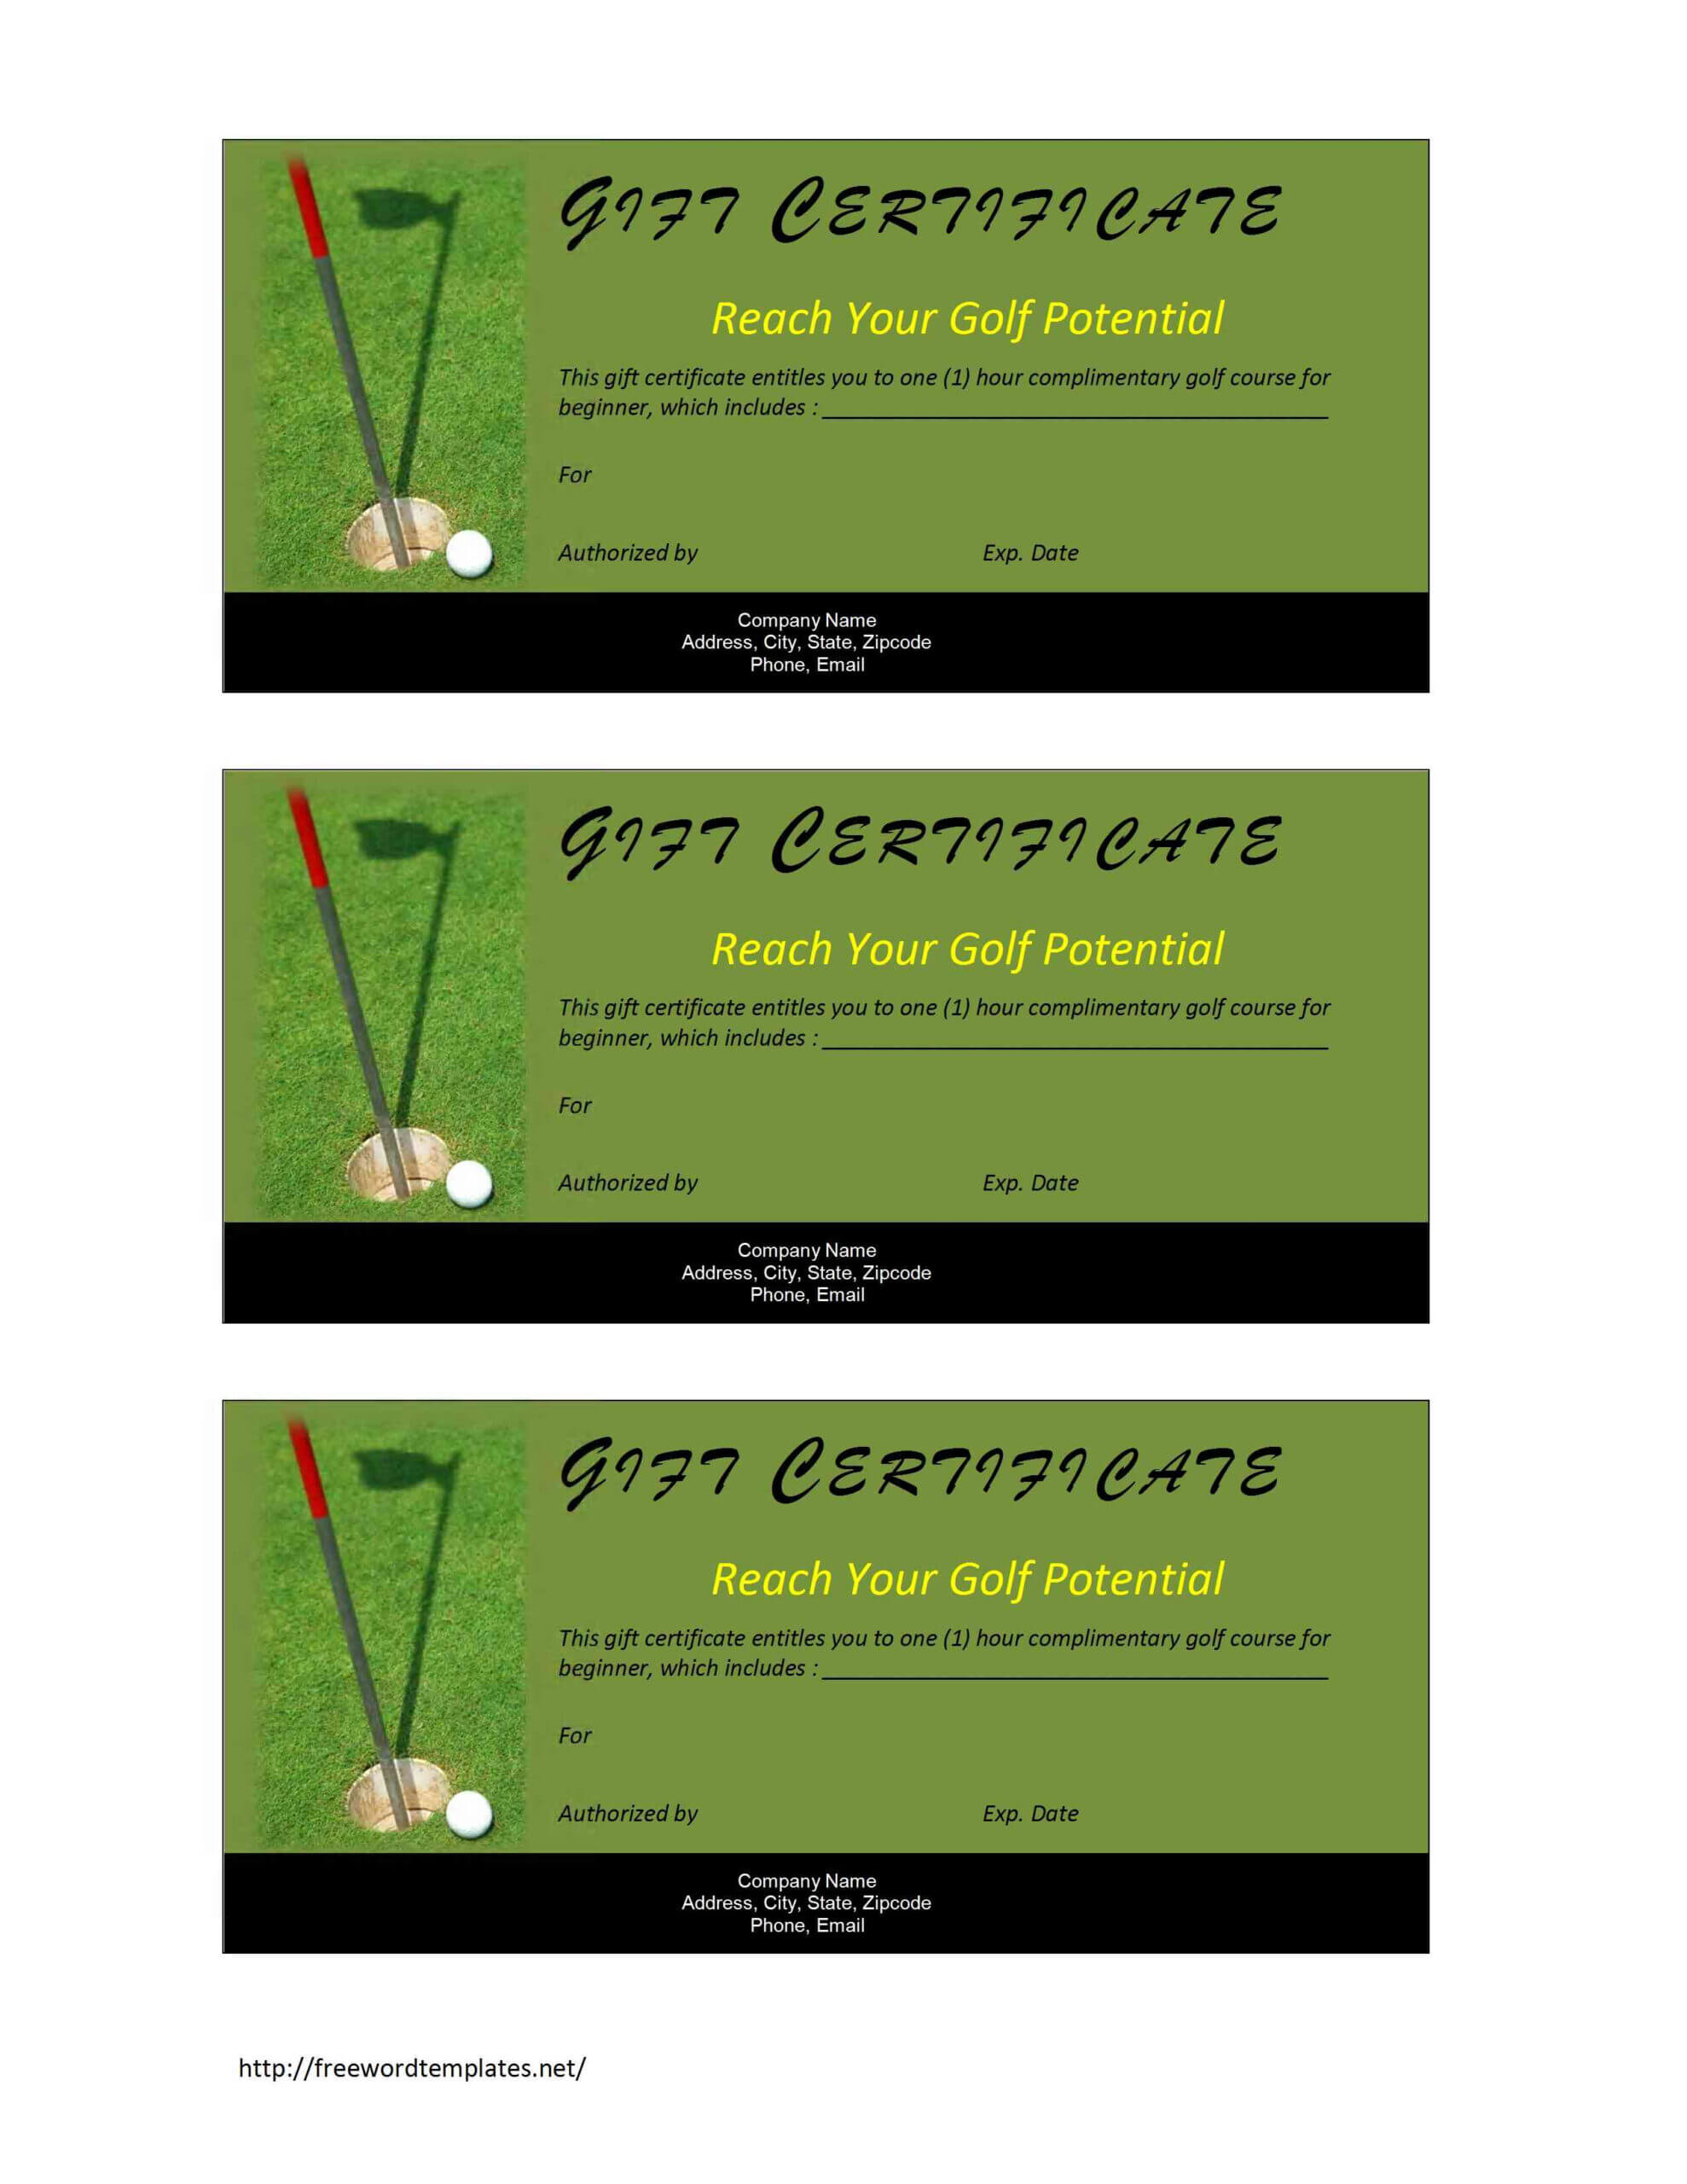 Golf Course Gift Certificate Template Free | Resume Writing Regarding Golf Gift Certificate Template